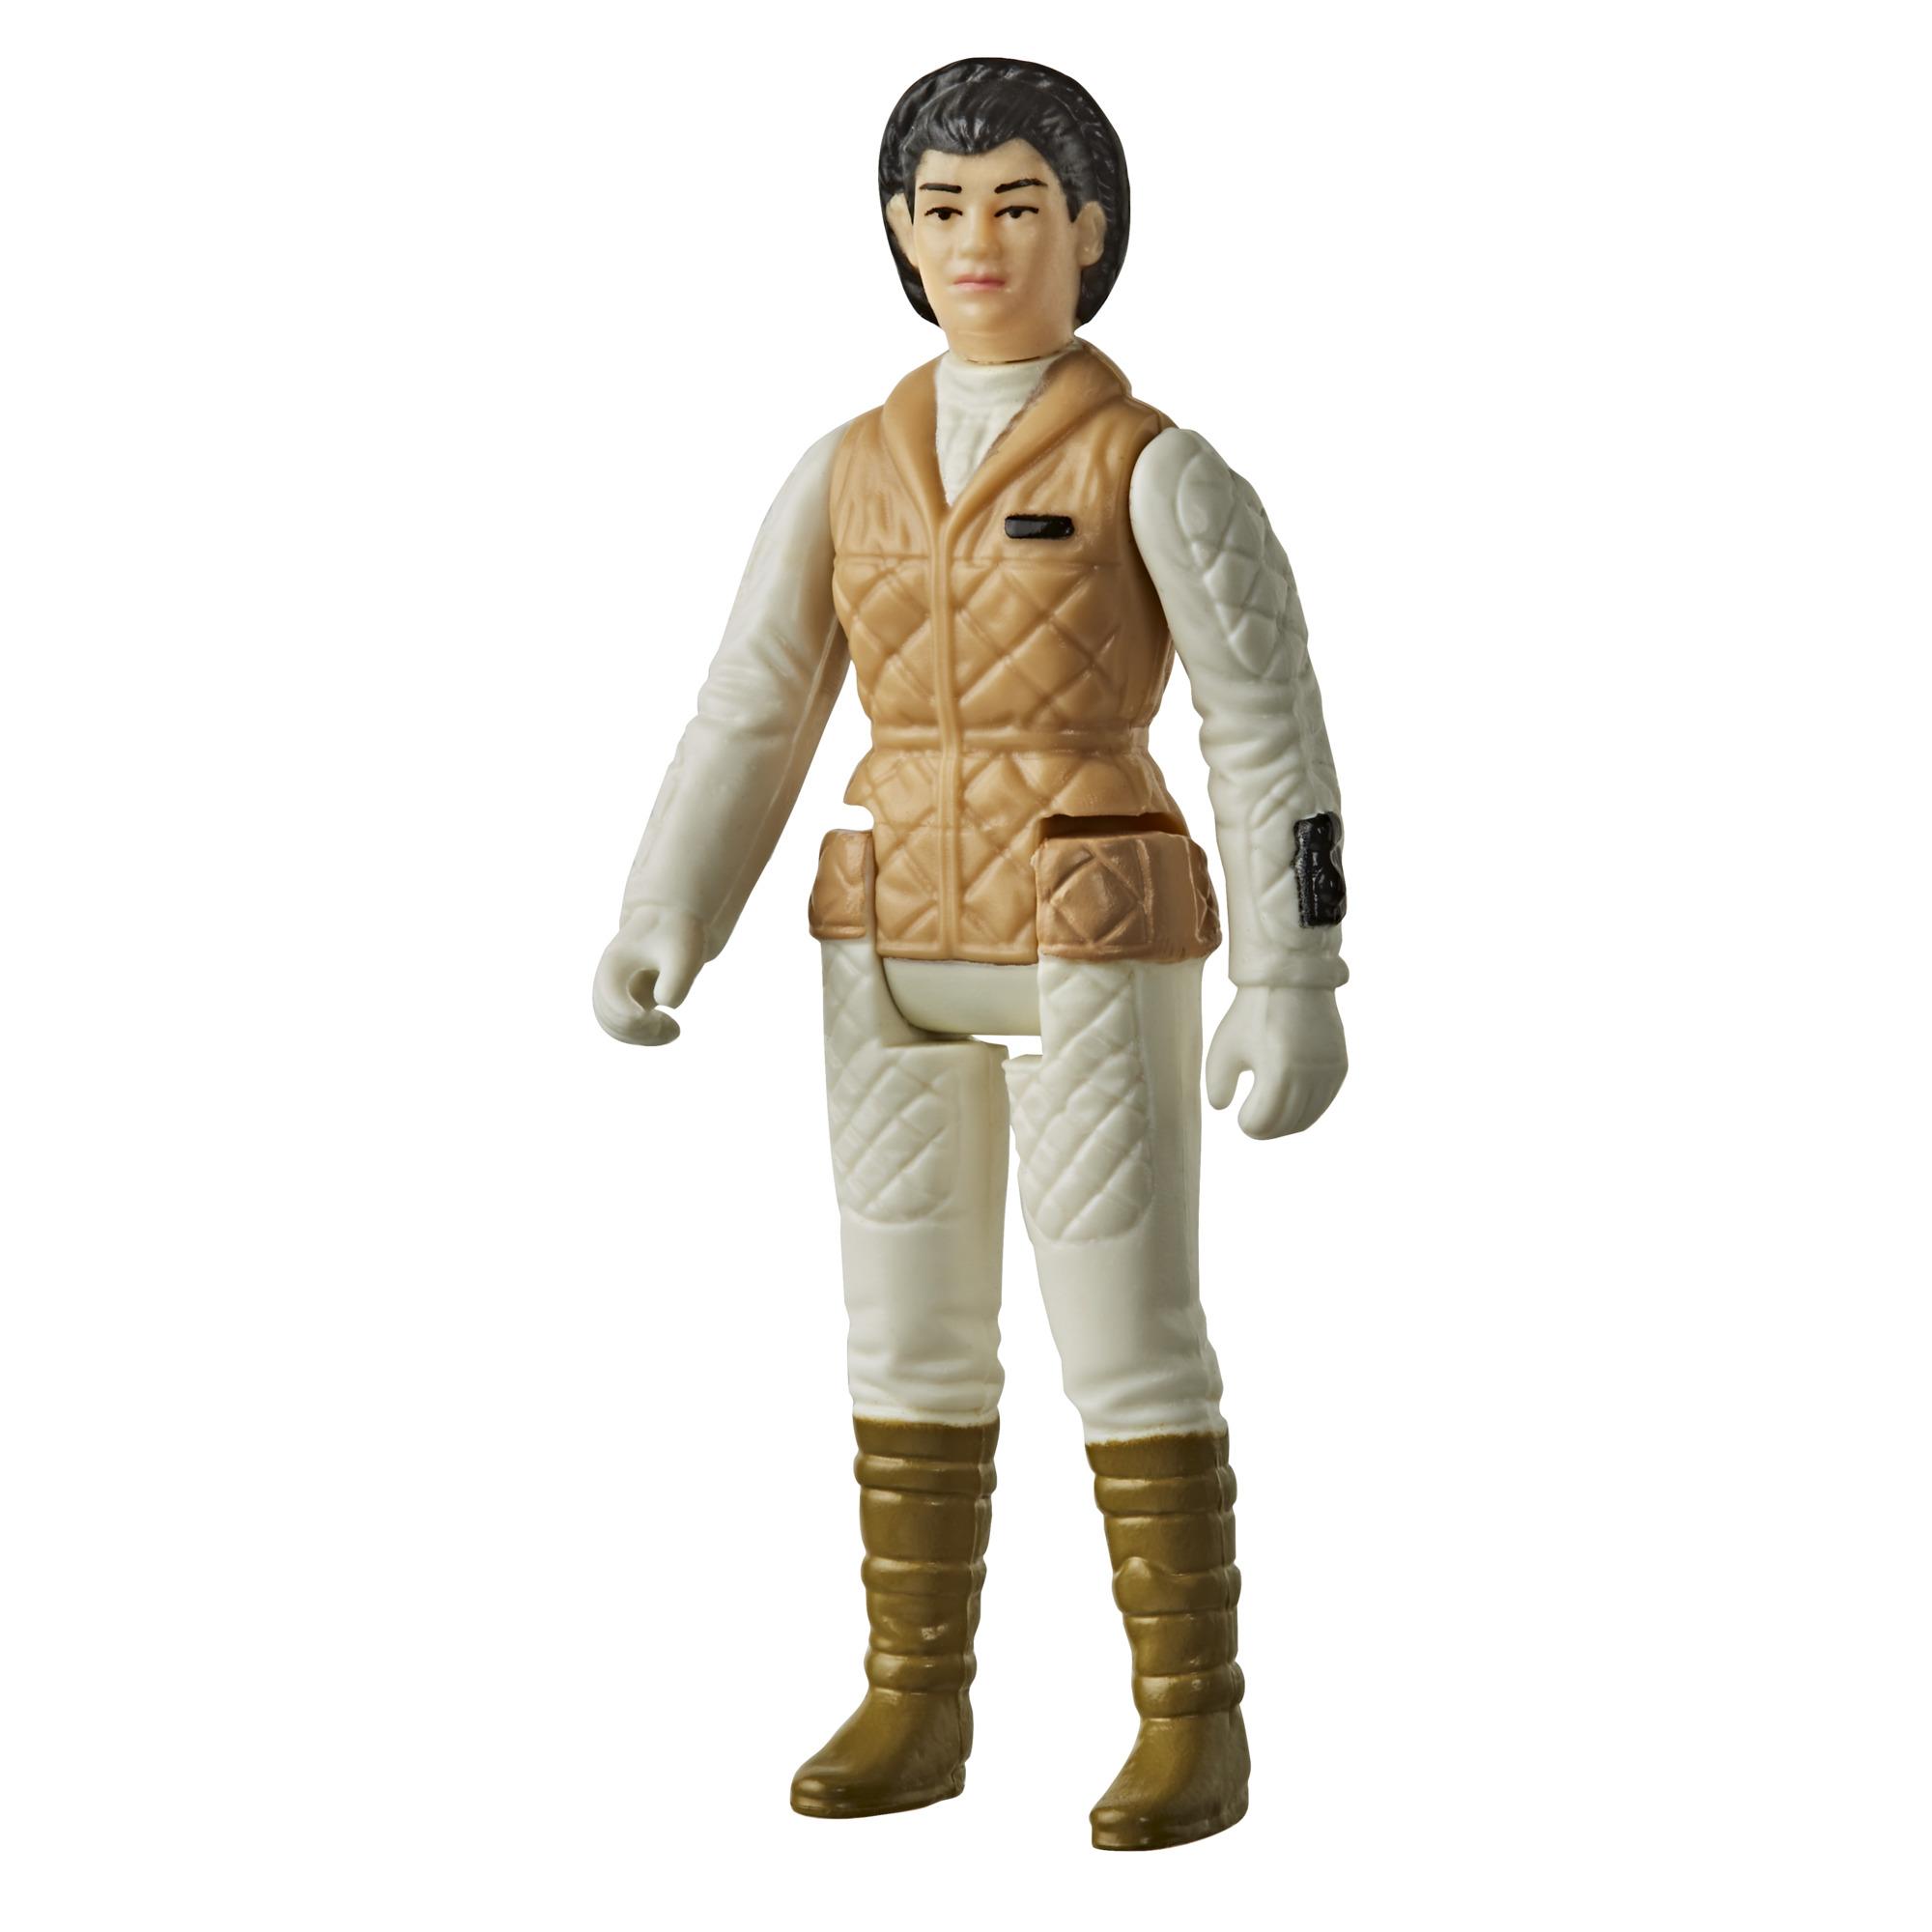 Hoth The Empire Strikes Back Princess Leia Organa Hasbro Star Wars The Vintage Collection Star Wars 3.75-inch Action Figure for sale online 